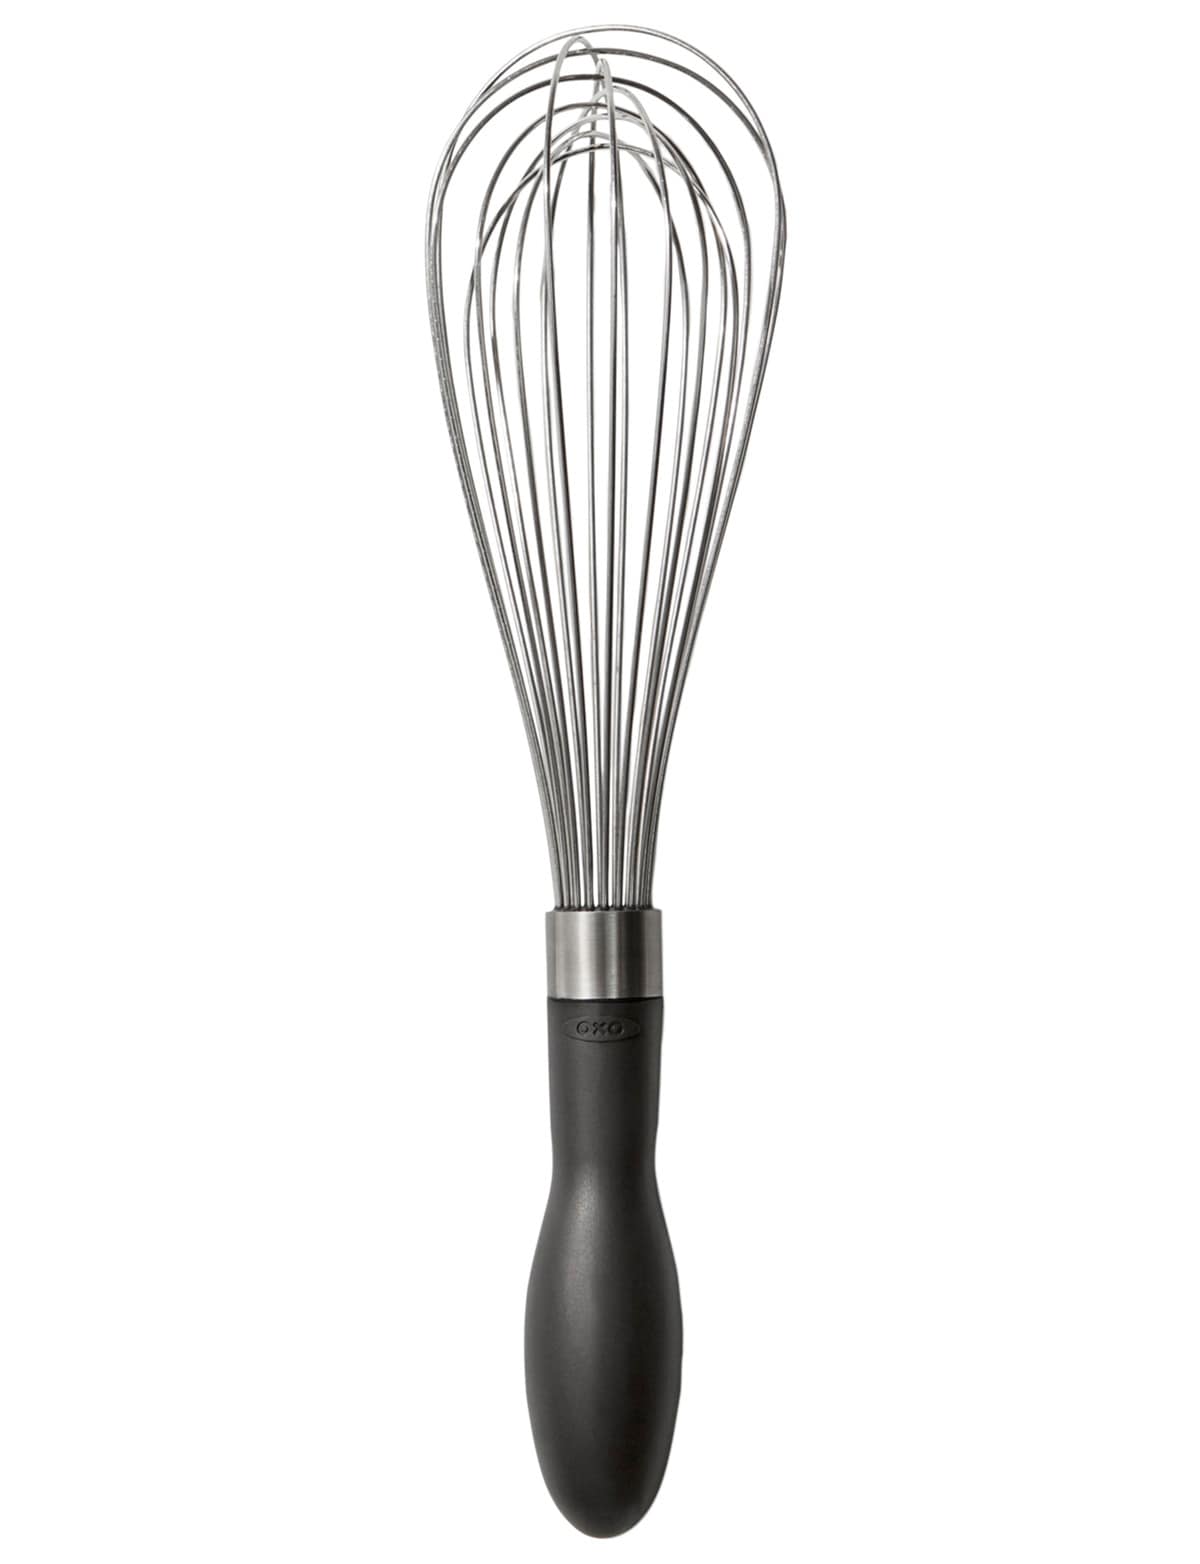 OXO Good Grips Dishwasher Safe Whisk, Color: Stainless Steel